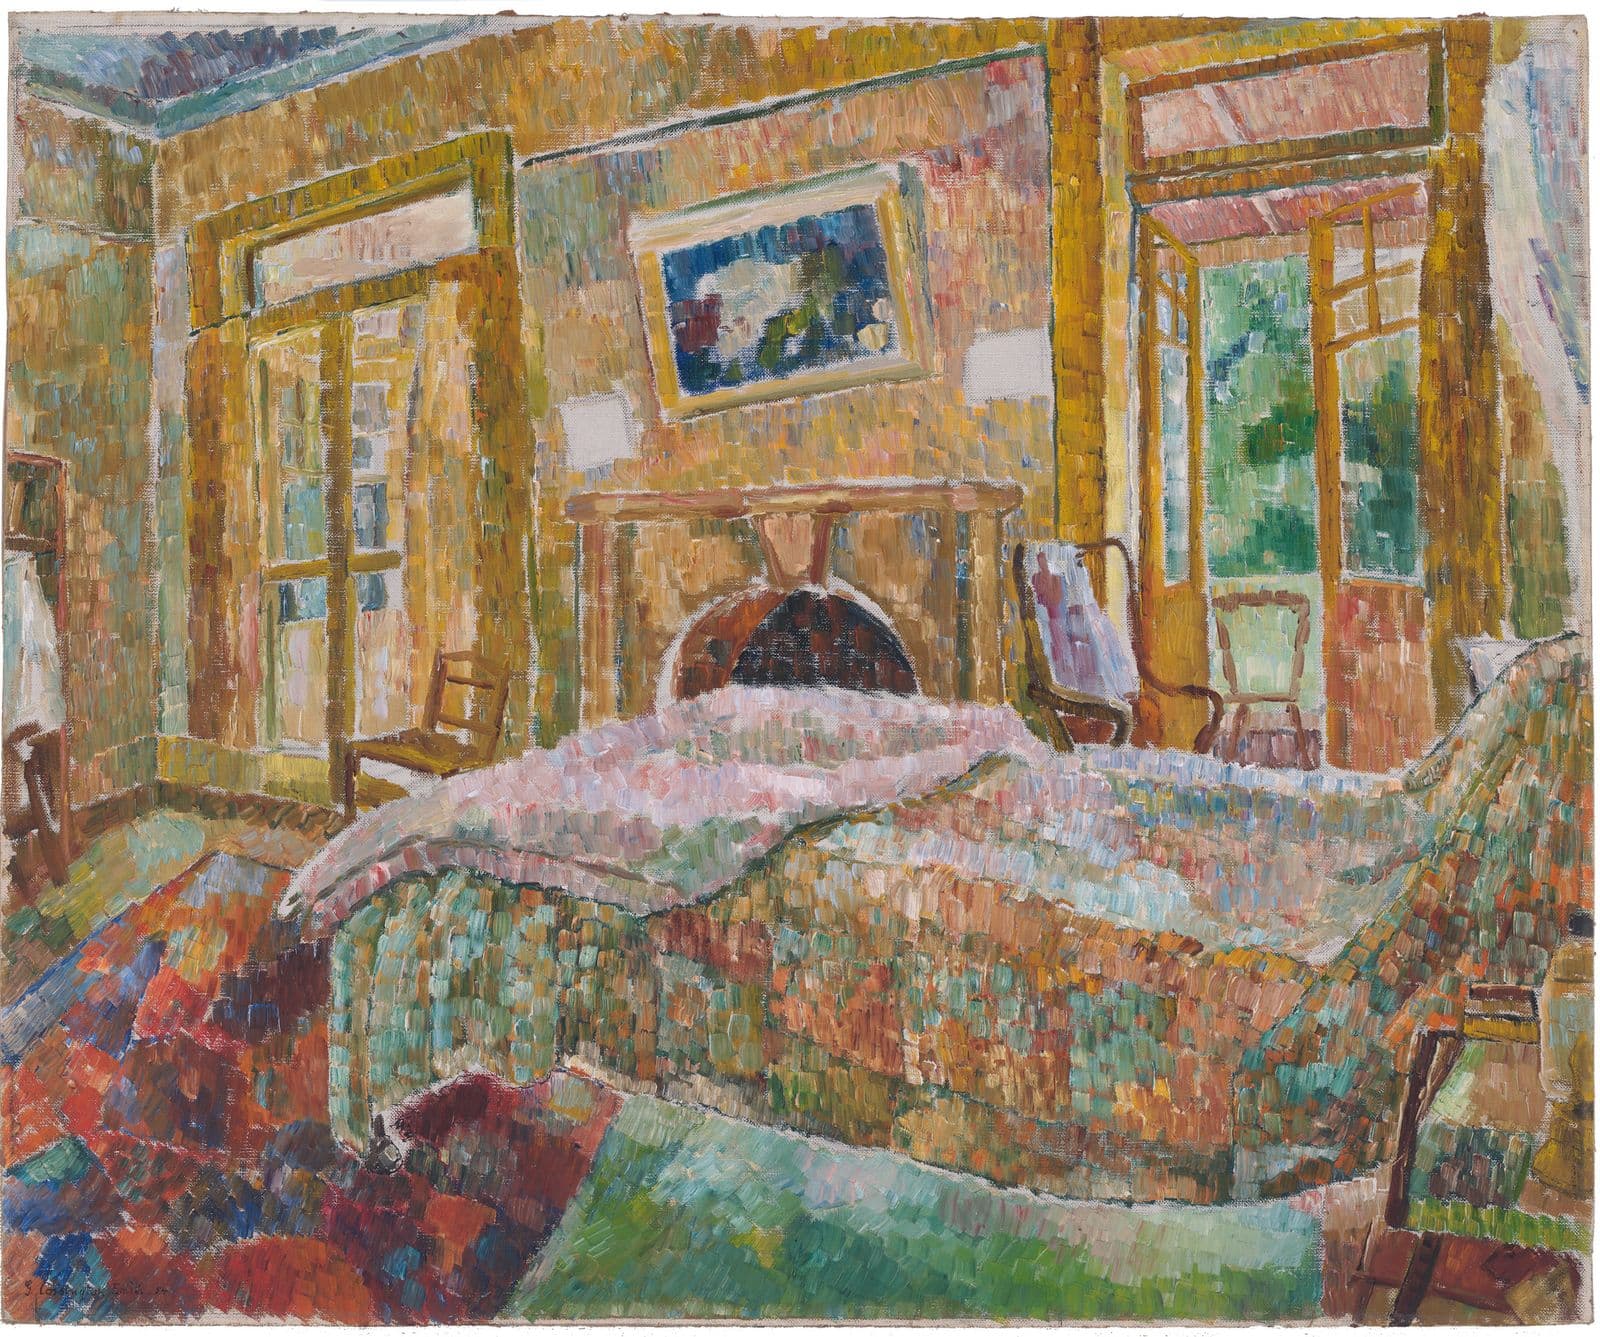 Impressionistic painting of the interior of a bedroom painted with short, multicoloured strokes